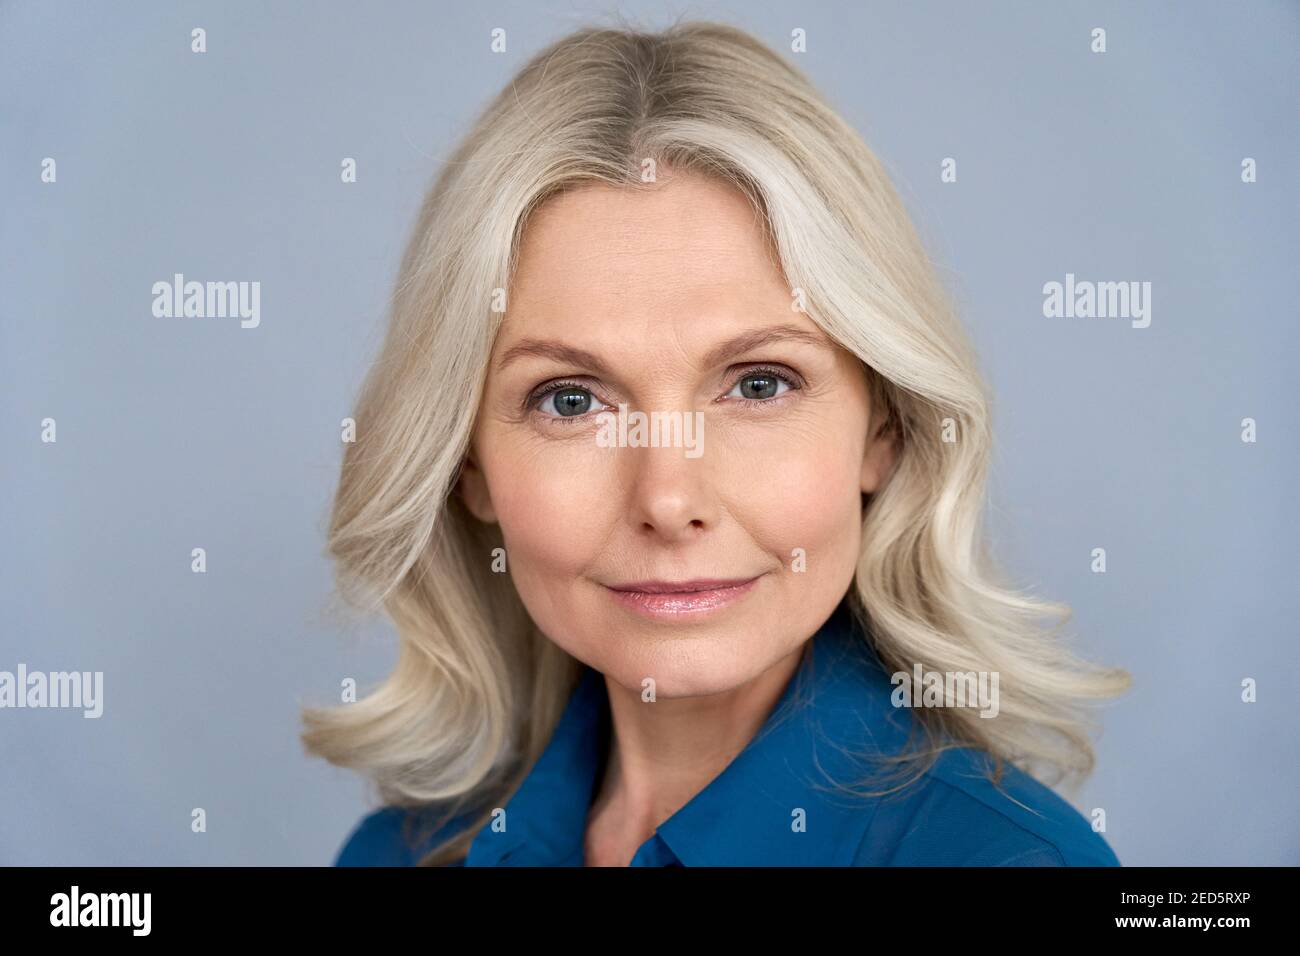 Confident mid aged business woman looking at camera isolated on grey, headshot. Stock Photo